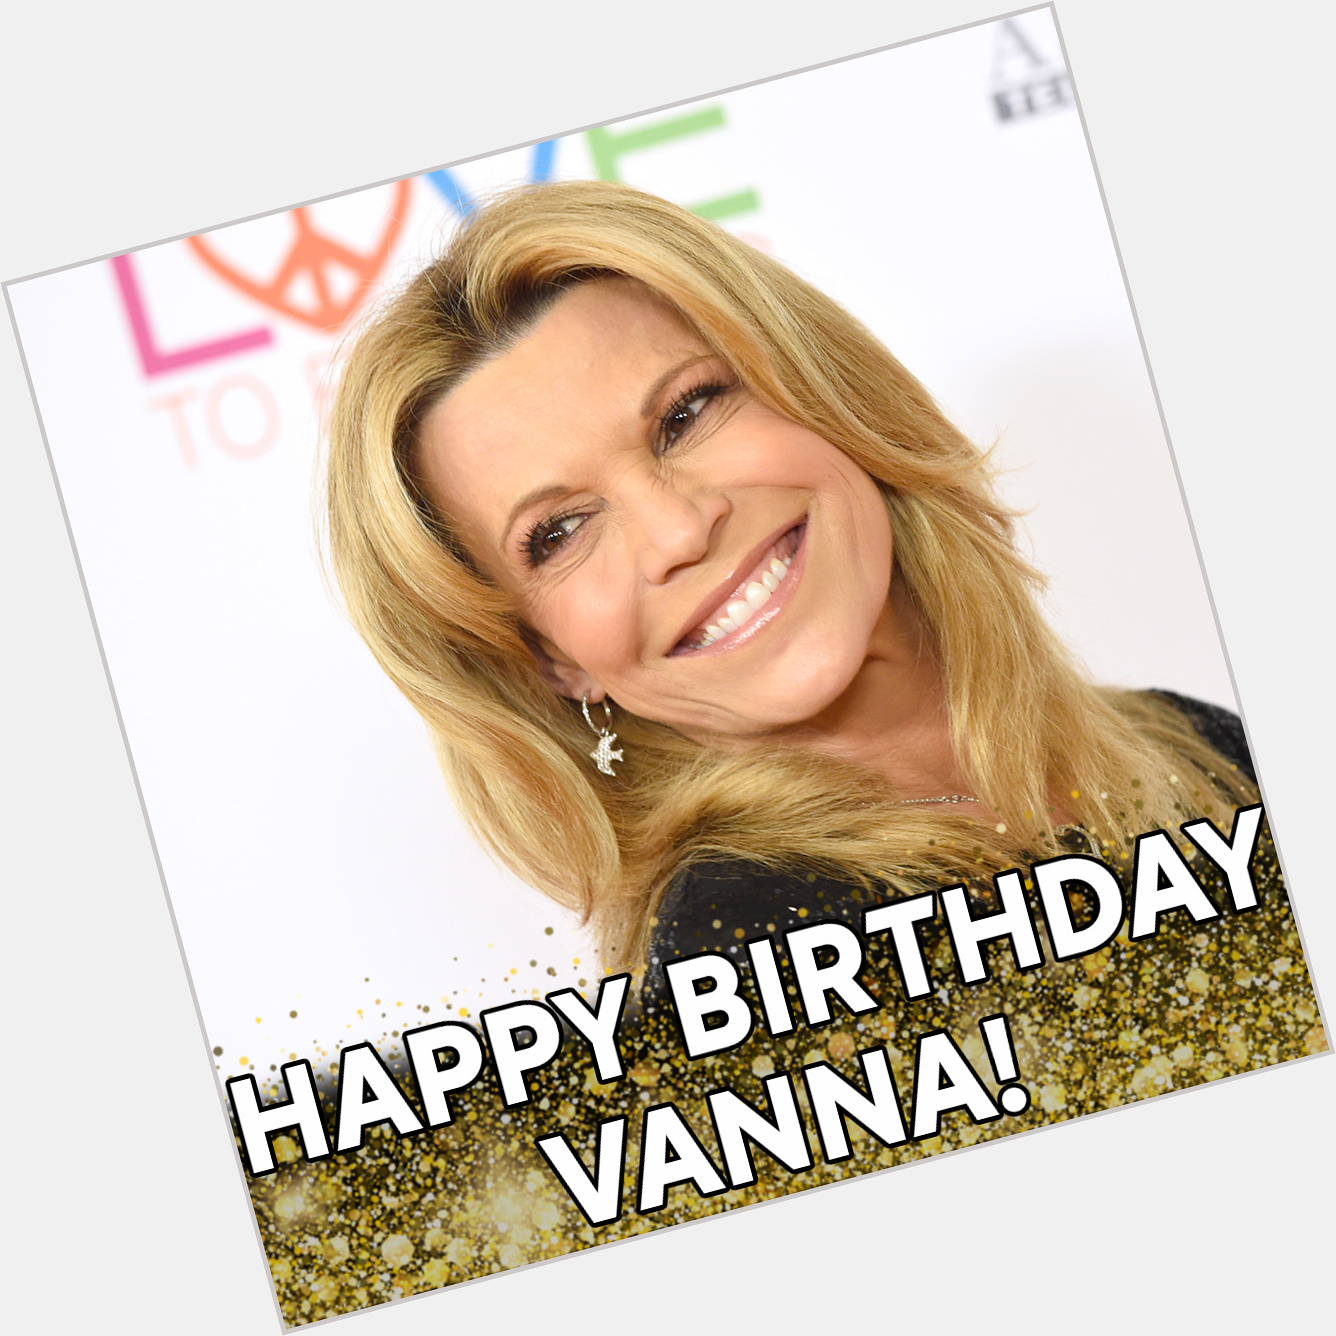 Join us in wishing Vanna White a very happy birthday! 